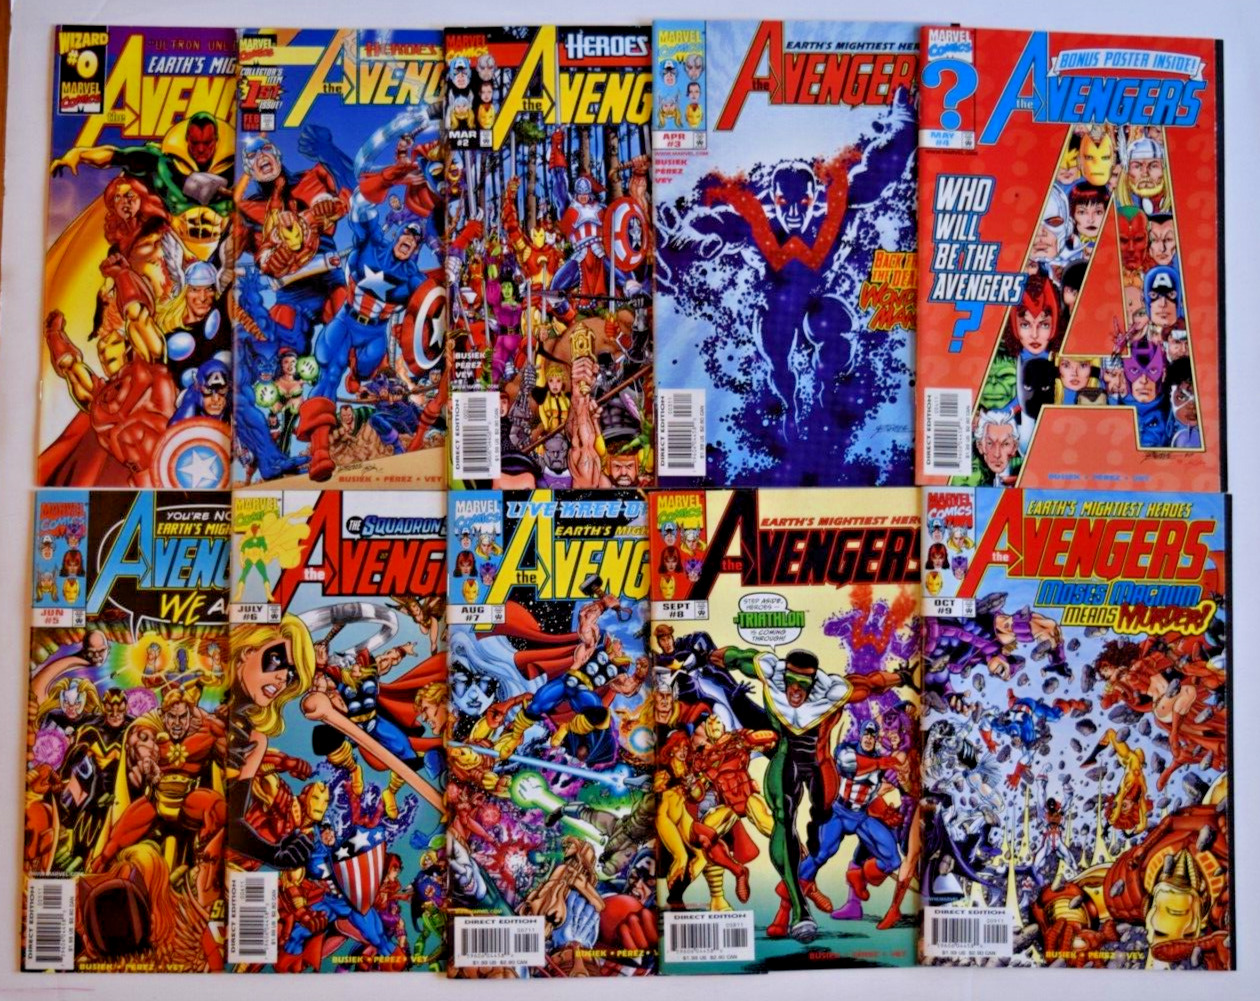 AVENGERS (1998) 94 ISSUE COMPLETE SET #0-84,500-503,FINALE, 1998-2001 ANNUALS